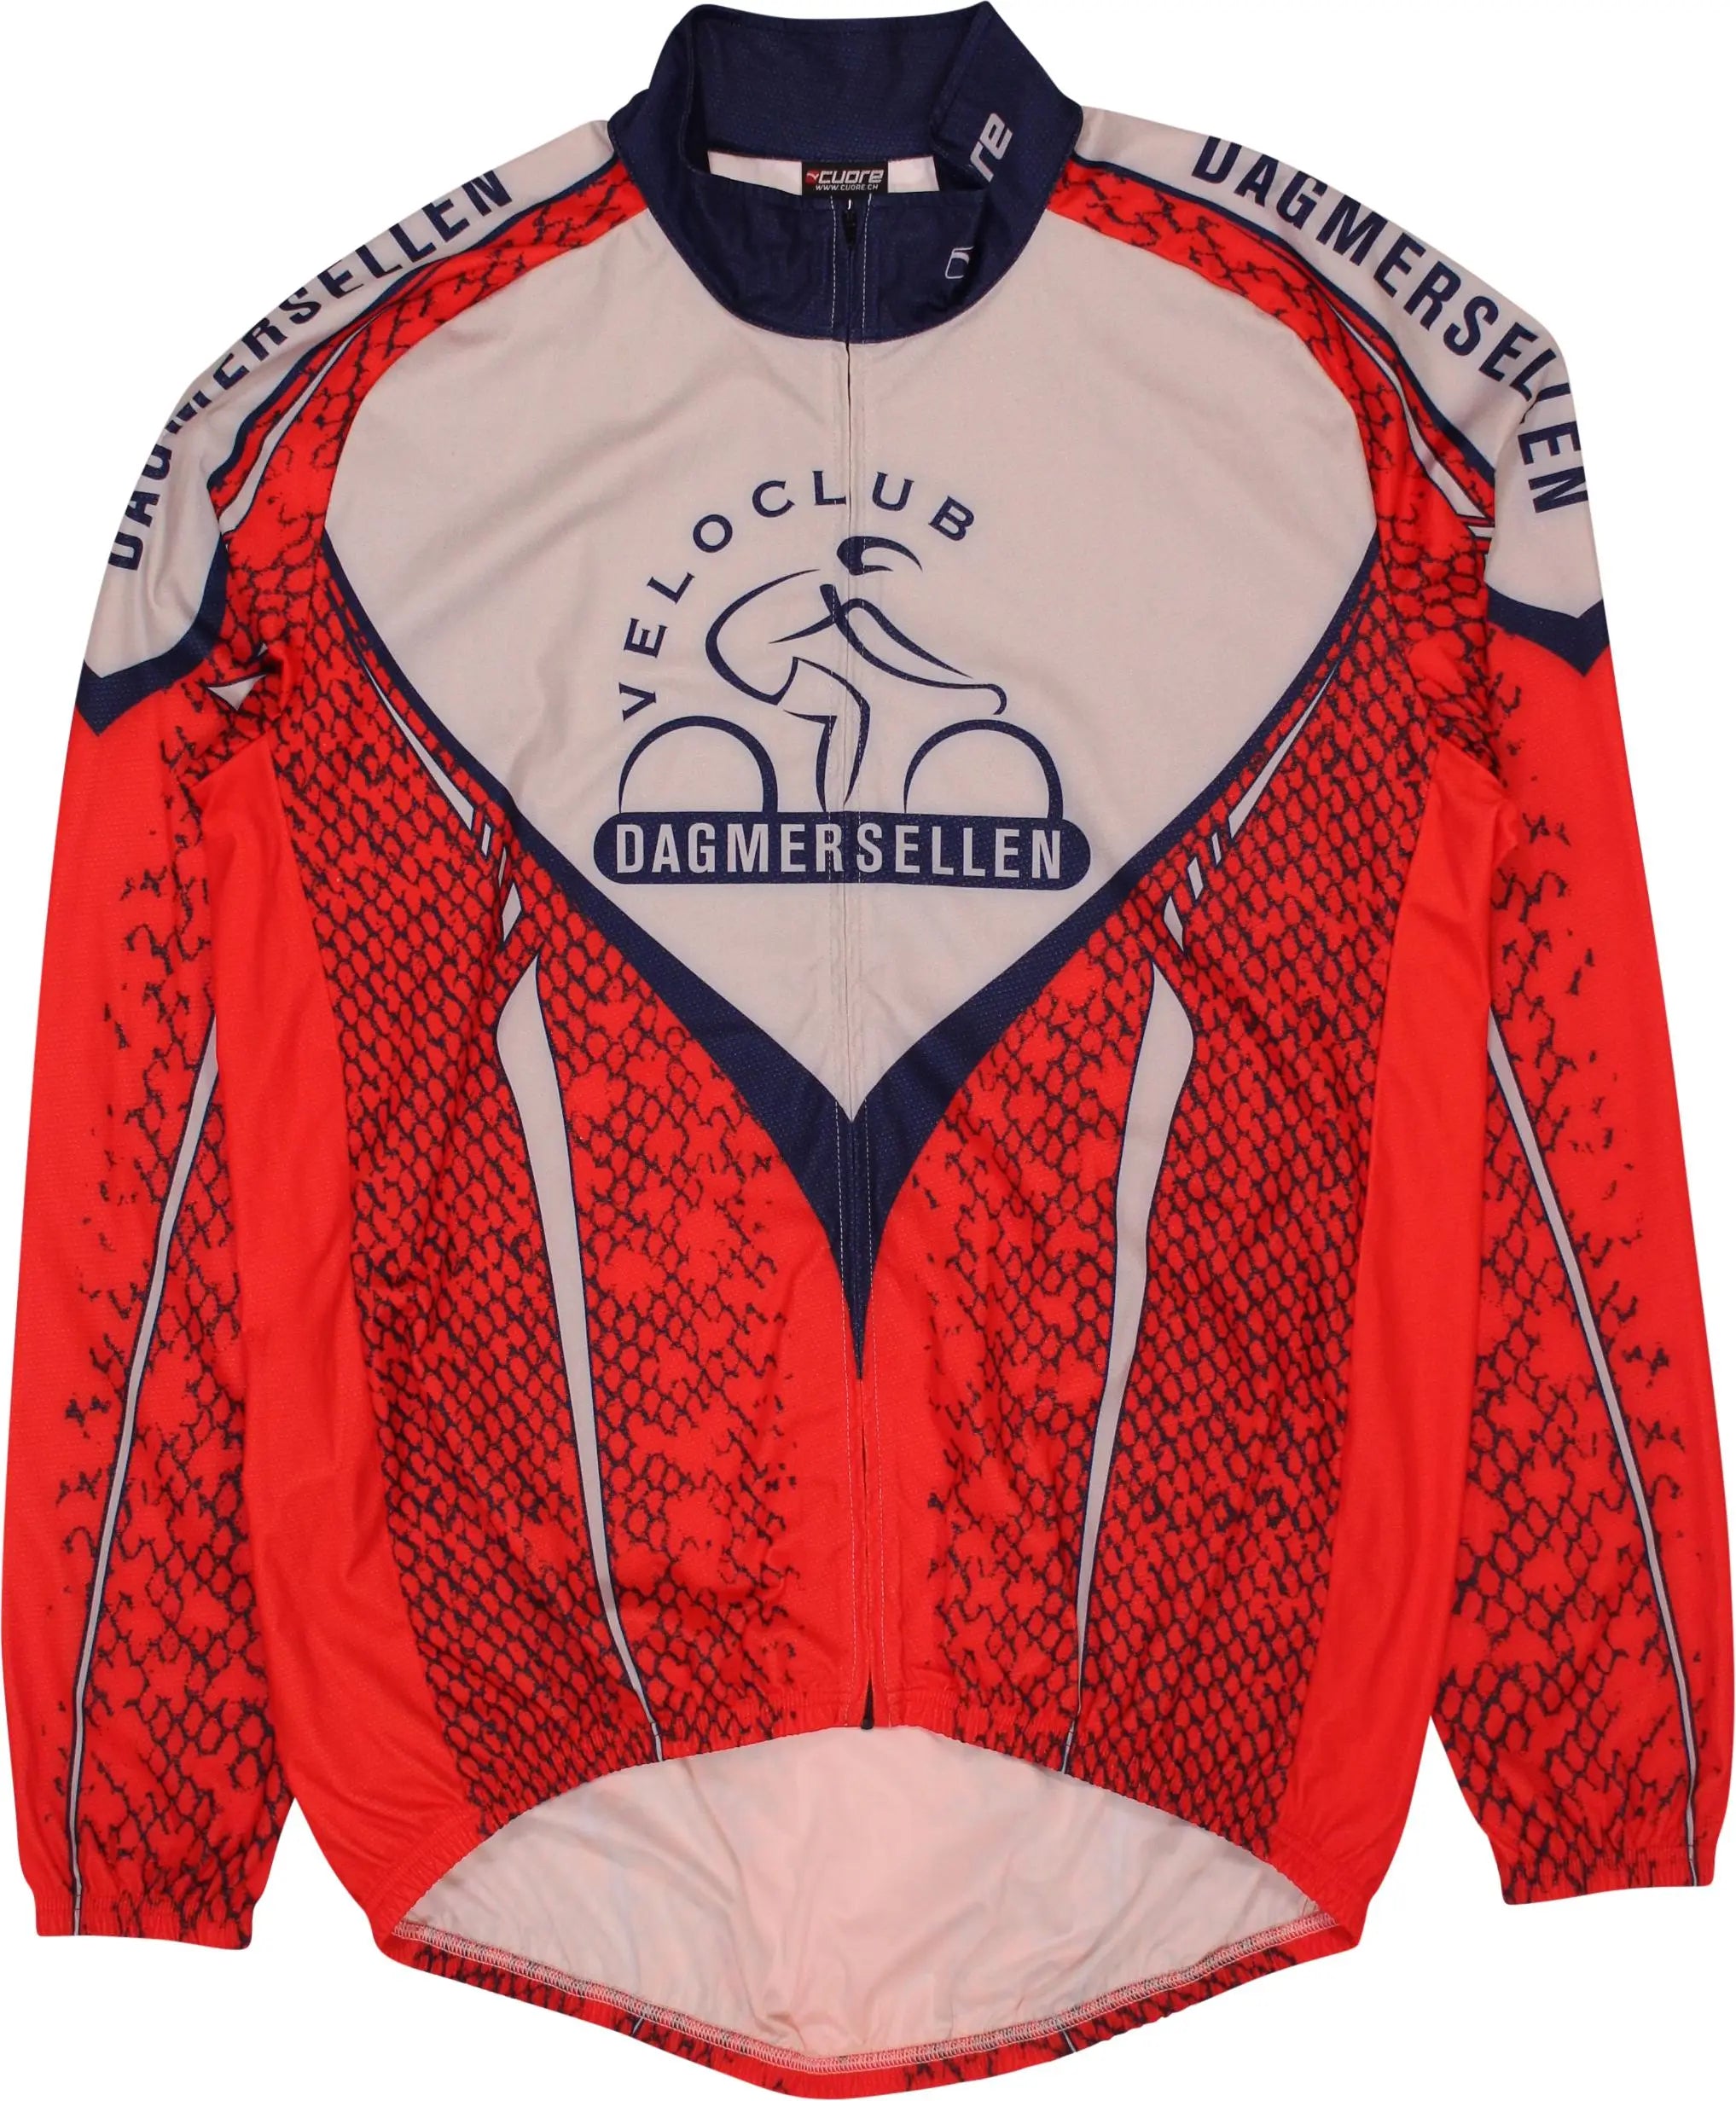 Cuore - Cycling Jacket by Cuore- ThriftTale.com - Vintage and second handclothing